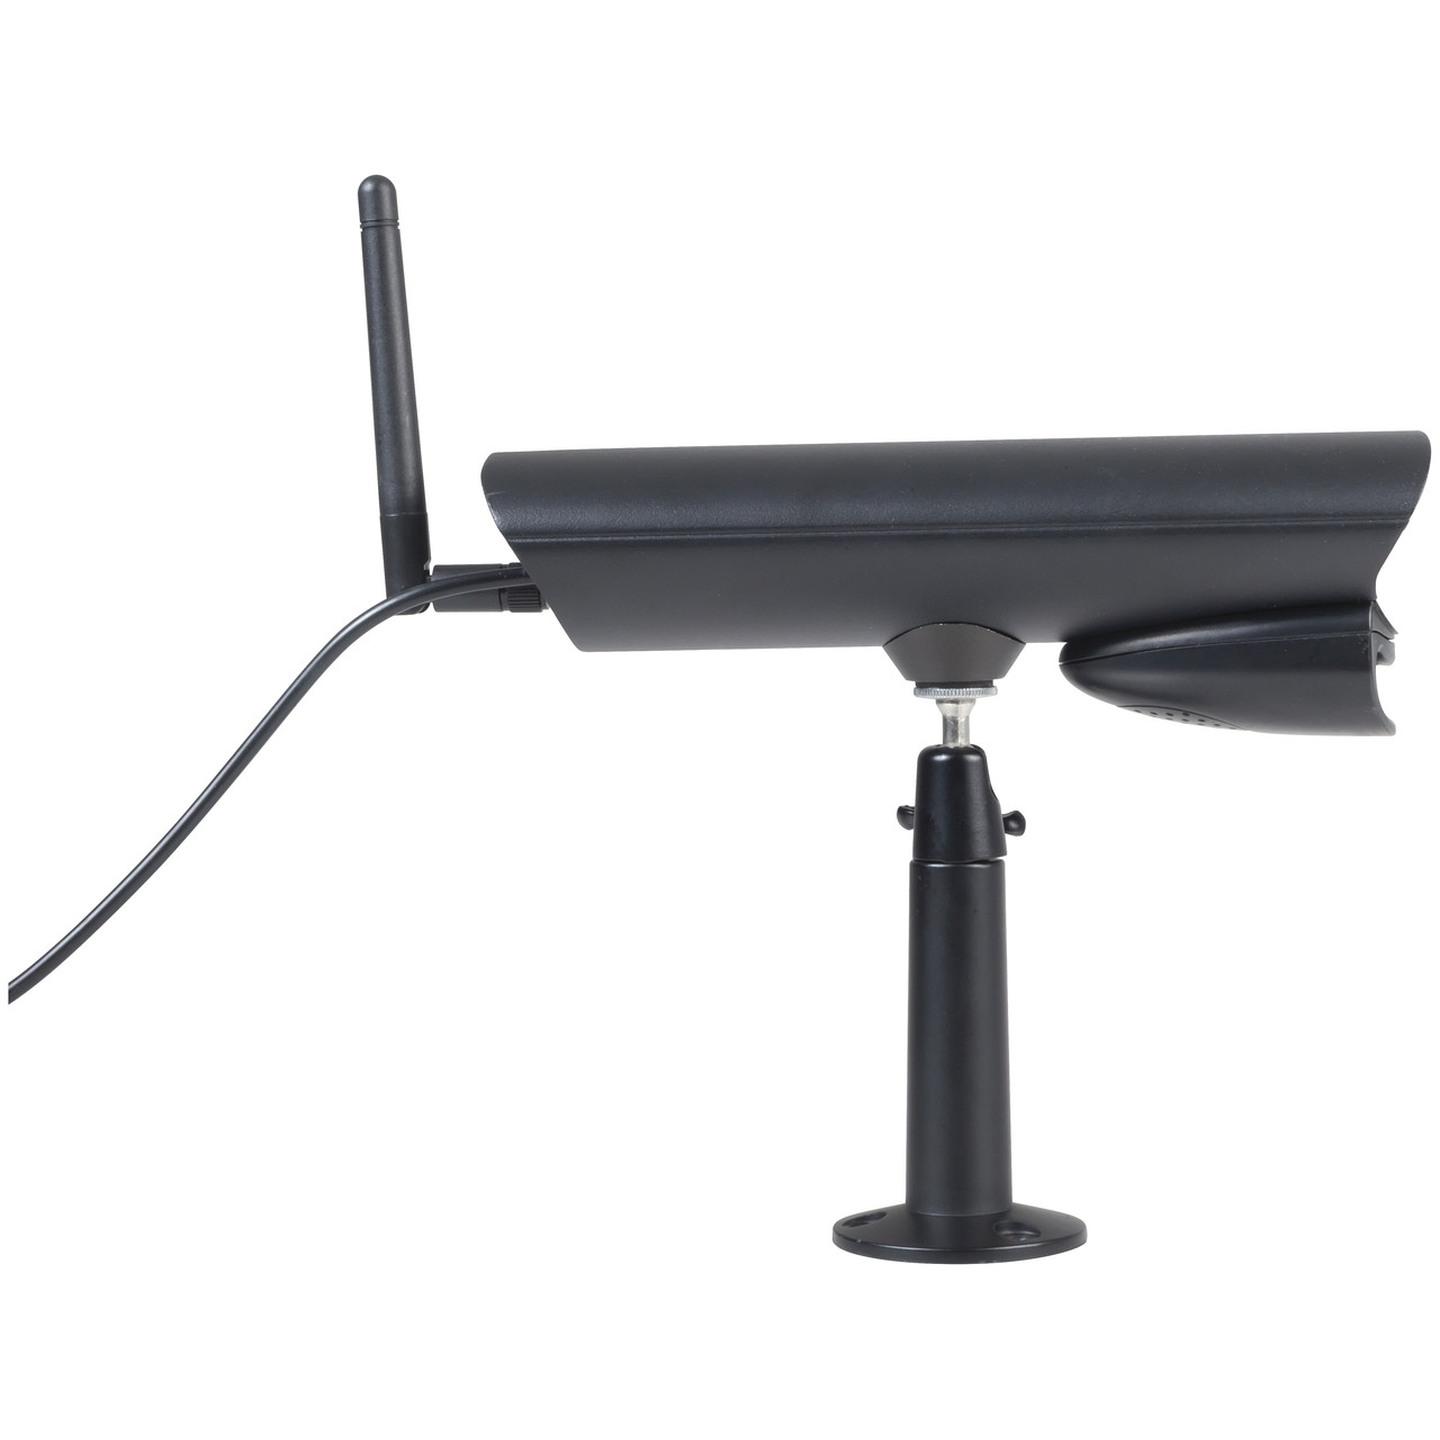 720p Wireless Camera to Suit QC-3764